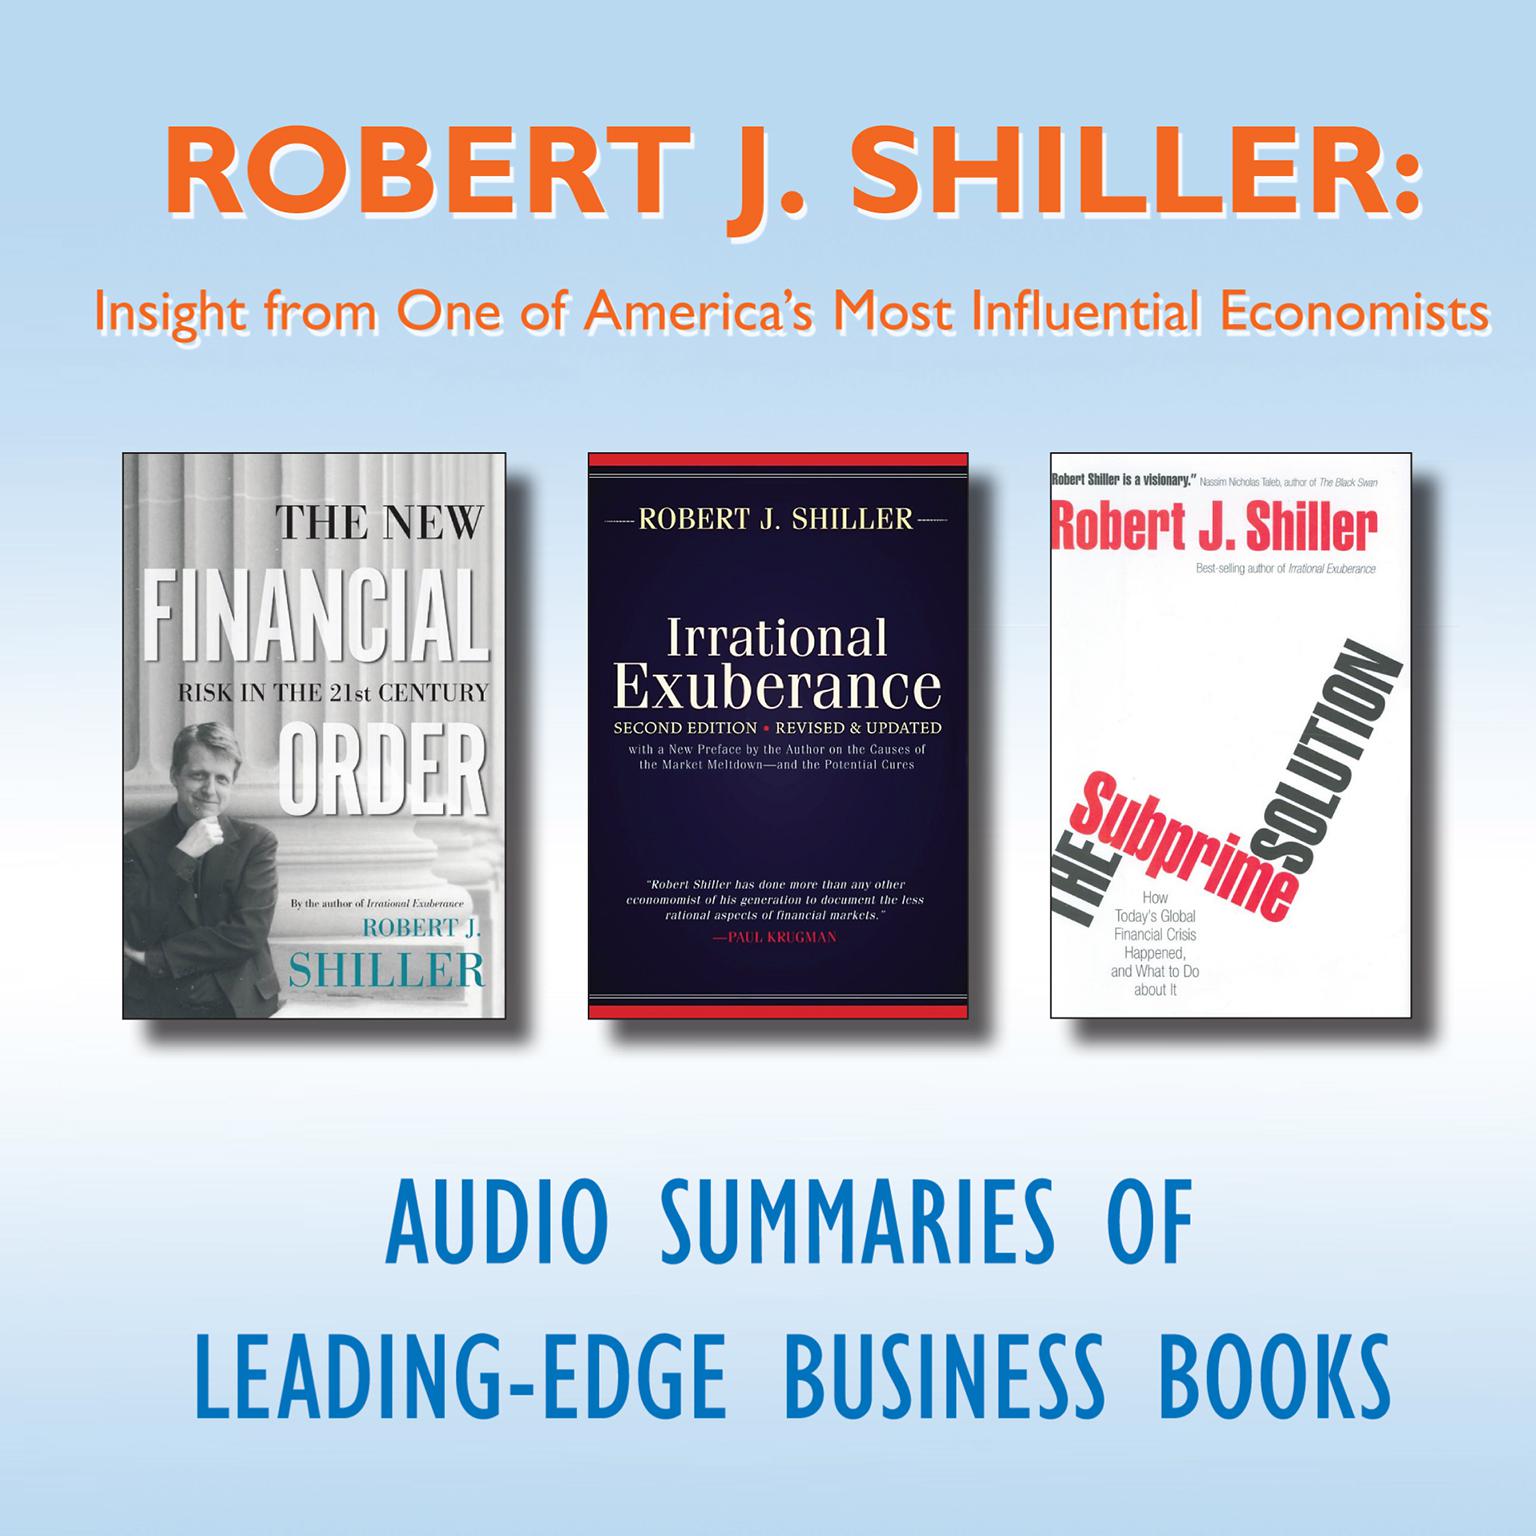 Robert J. Shiller: Insight from One of America’s Most Influential Economists Audiobook, by getAbstract